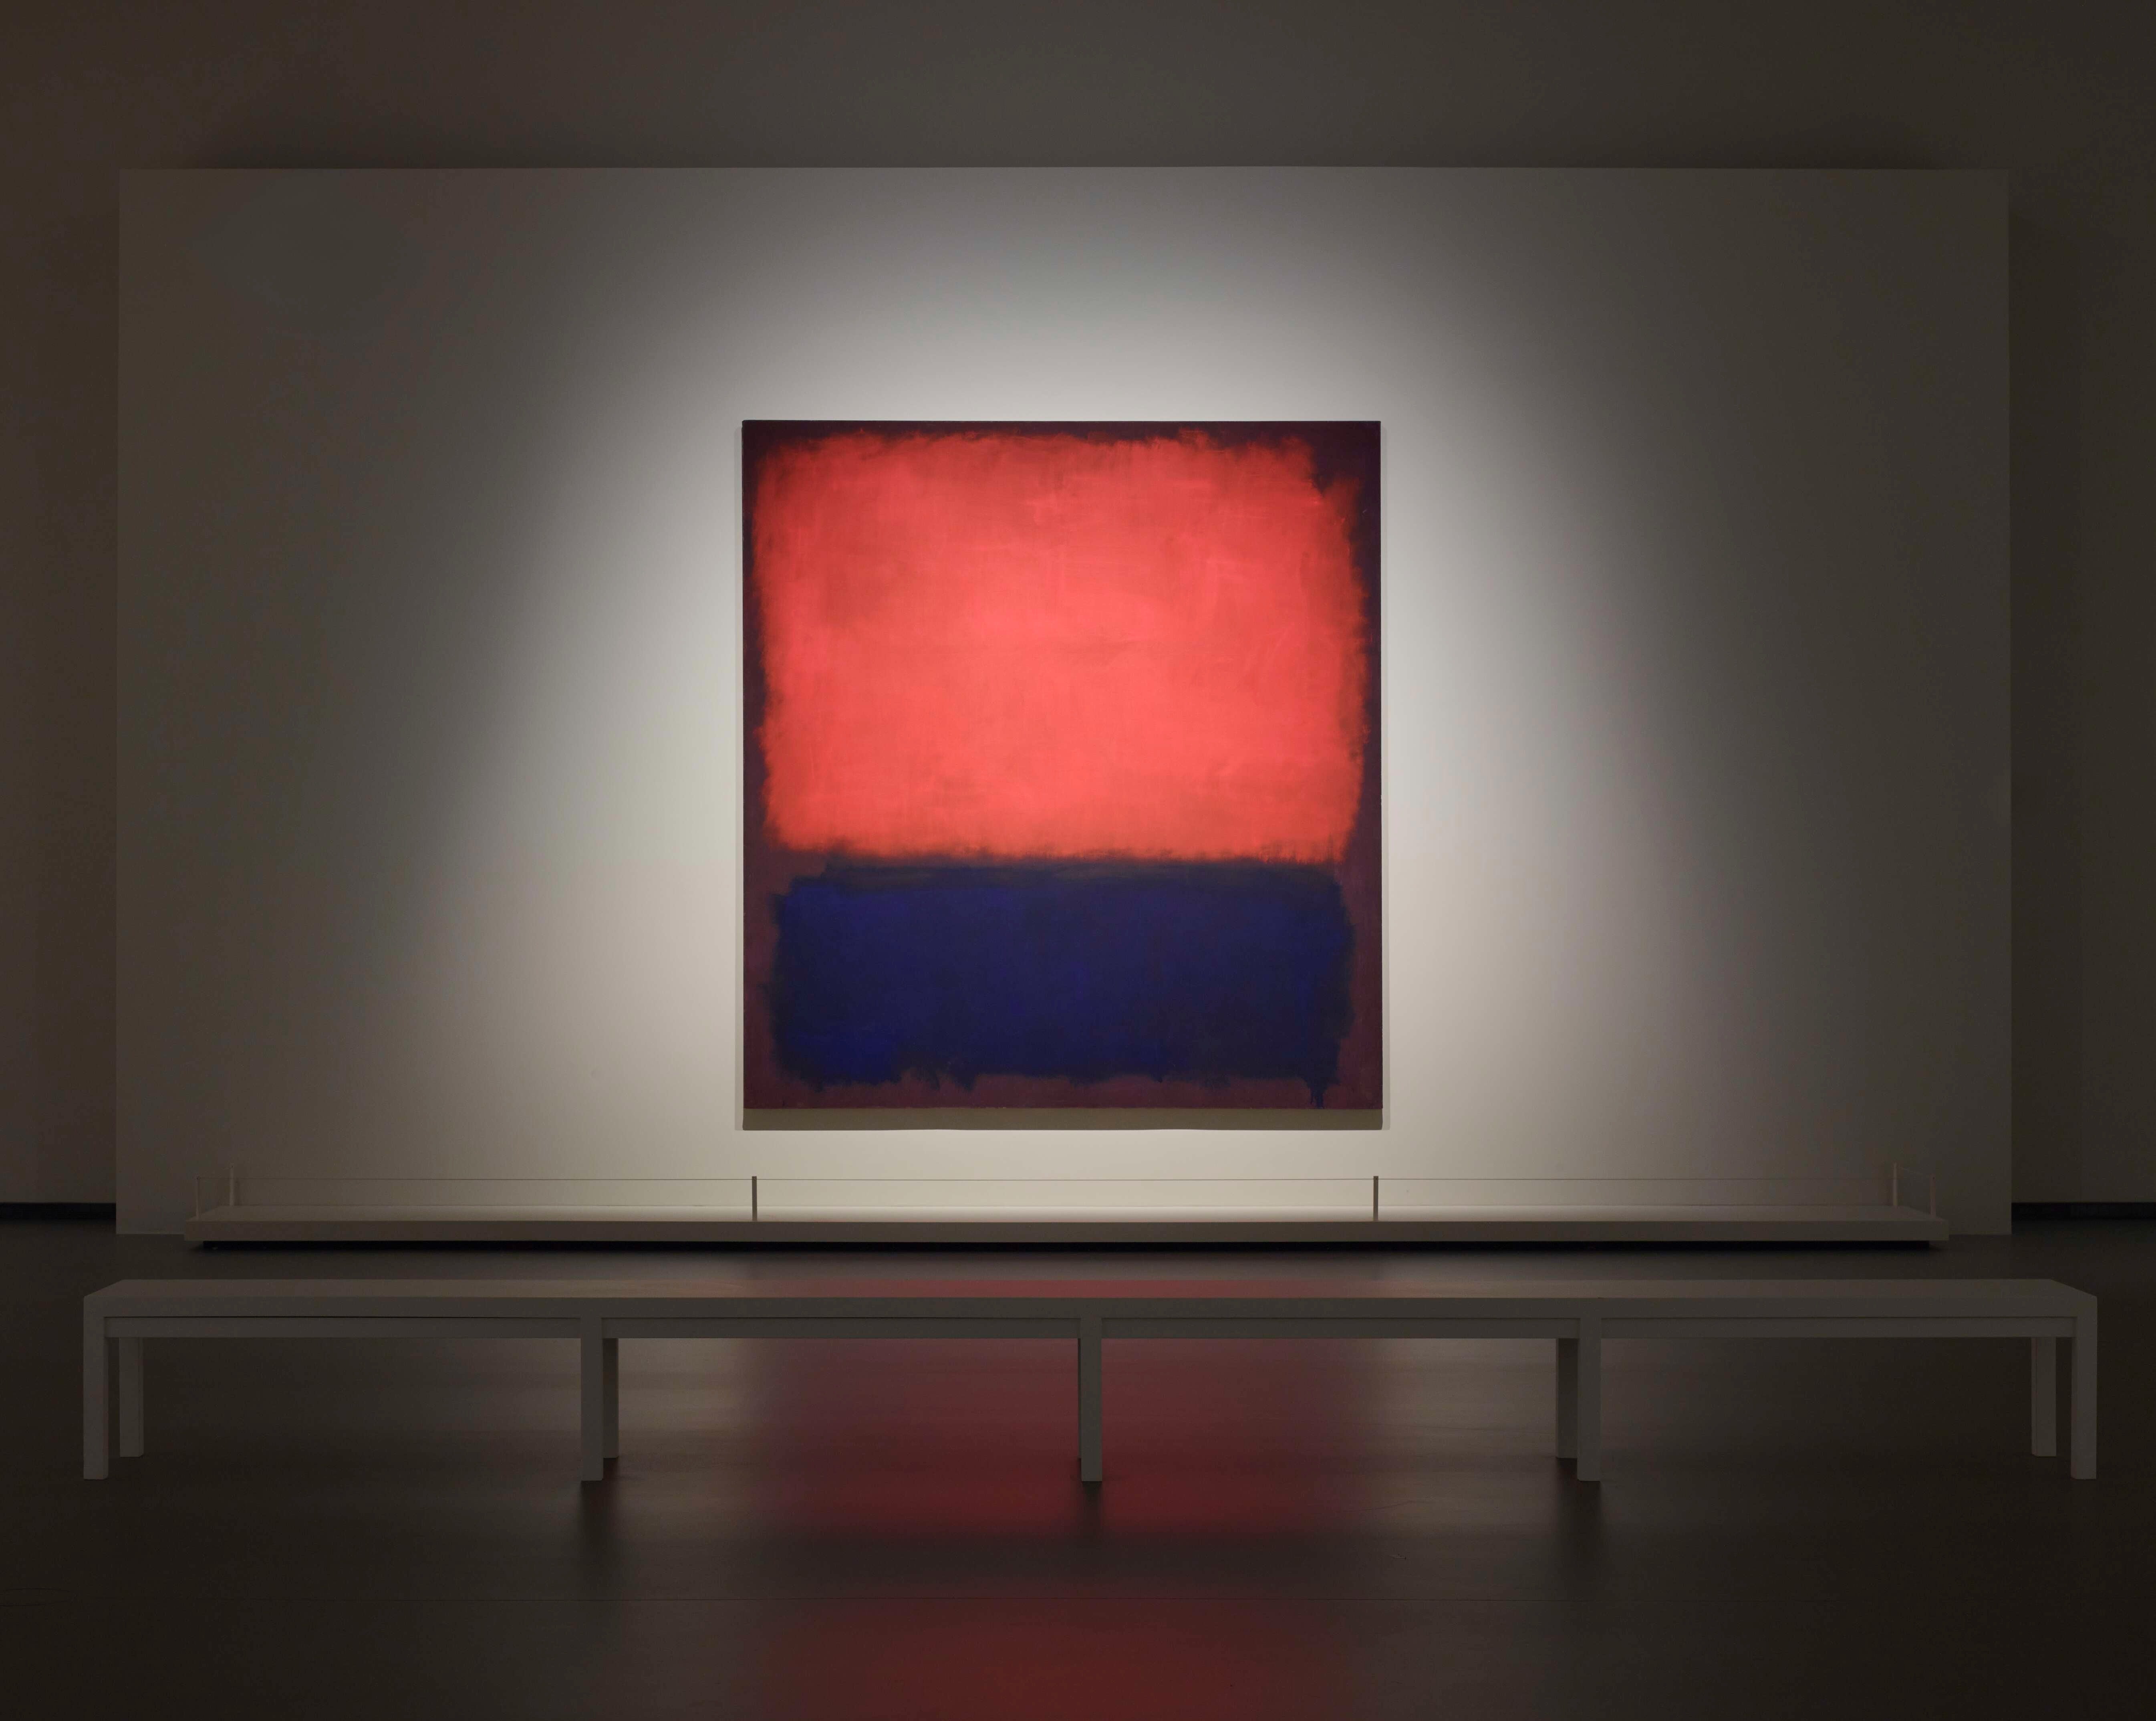 Mark Rothko's abstract oil painting on canvas